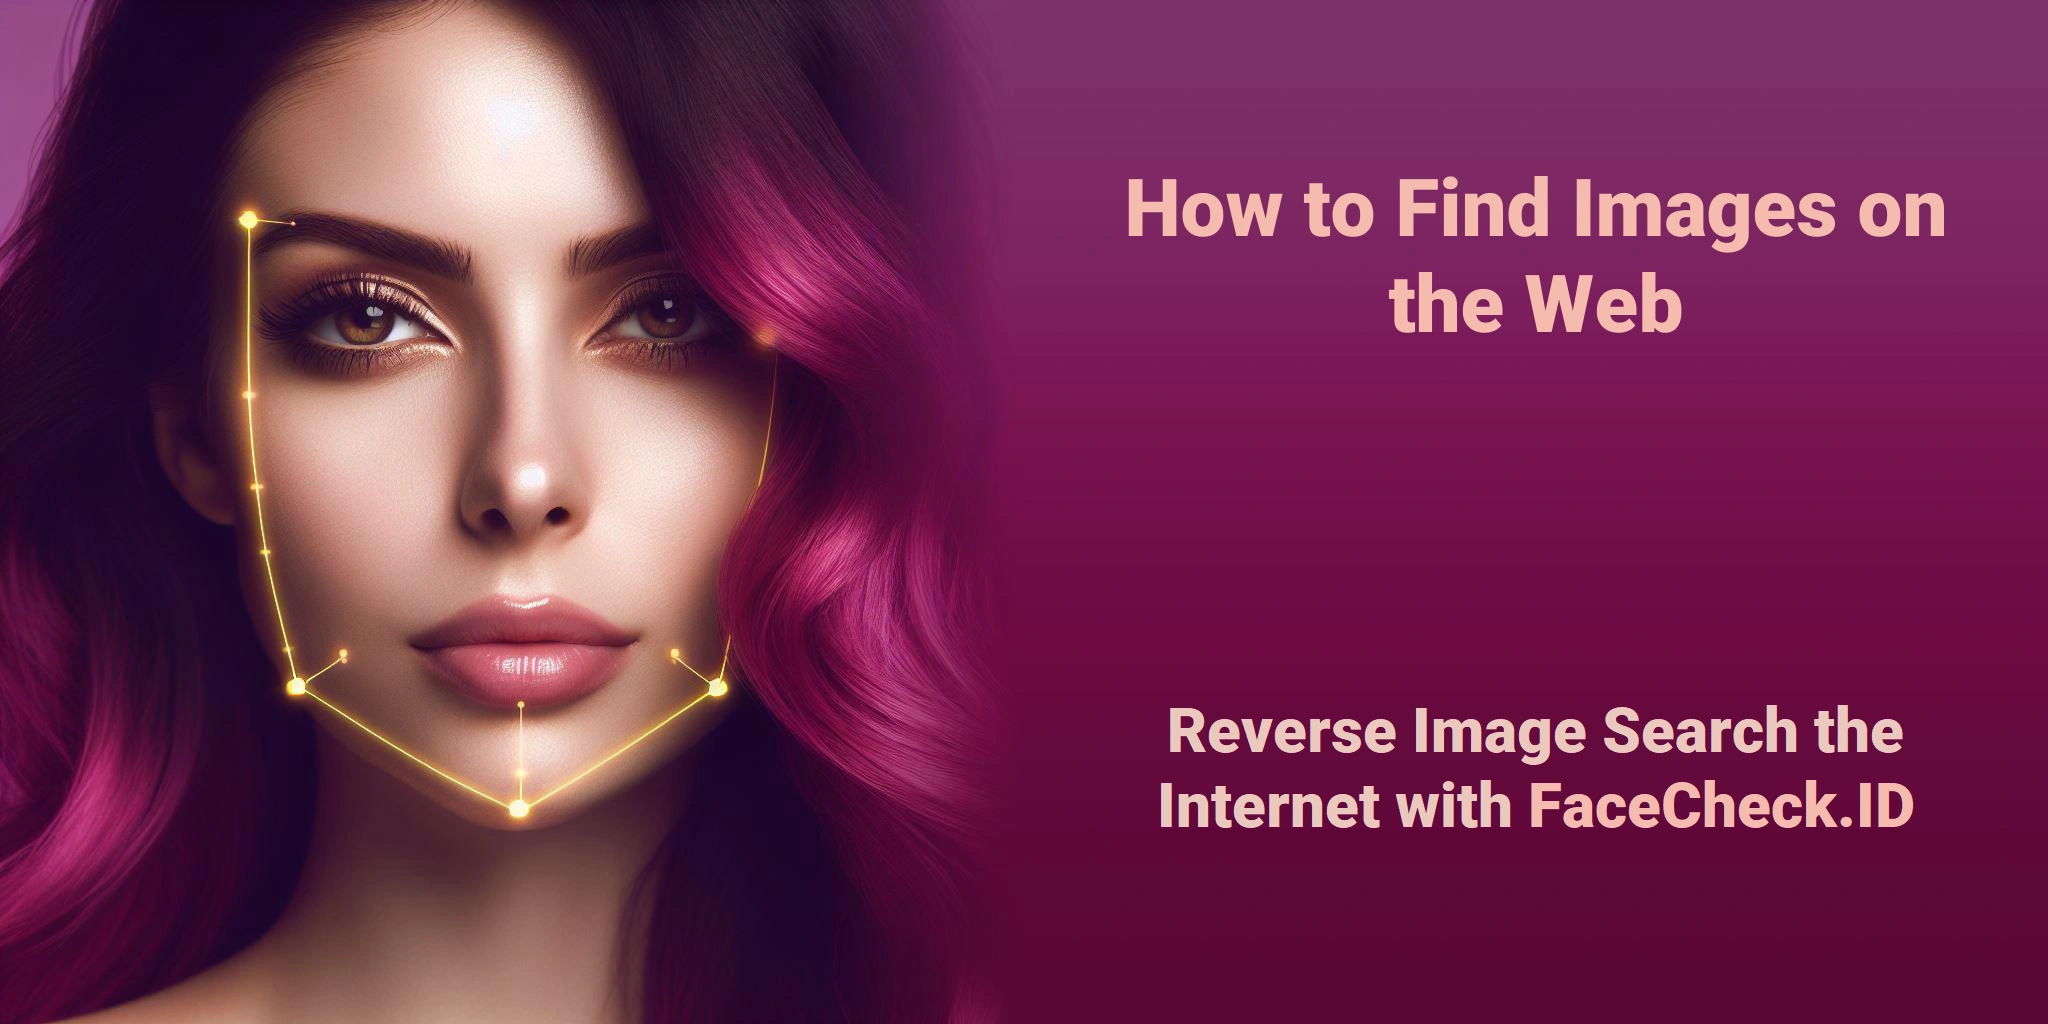 How to Find Images on the Web Reverse Image Search the Internet with FaceCheck.ID